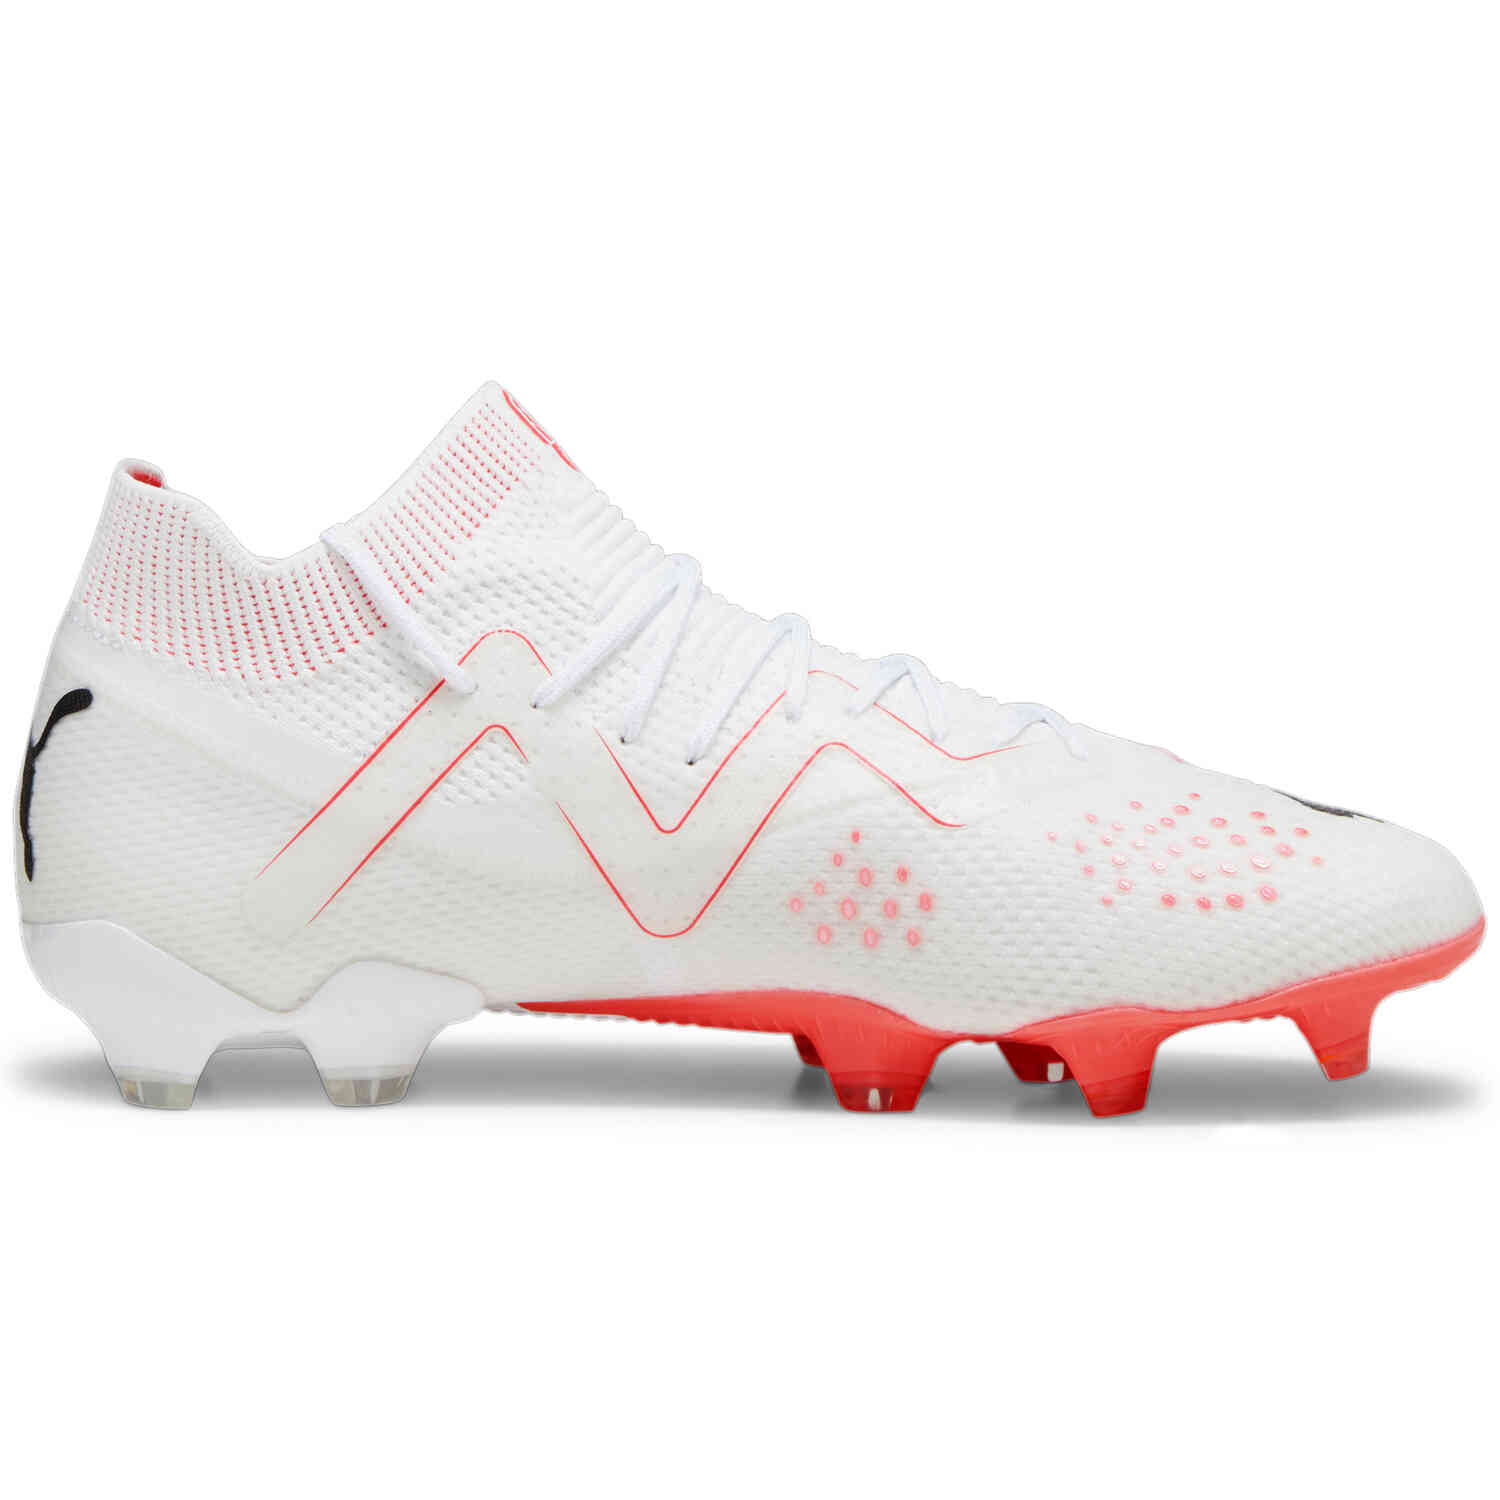 PUMA FUTURE ULTIMATE FG/AG Soccer Cleats - White, Black & Fire Orchid -  Soccer Master